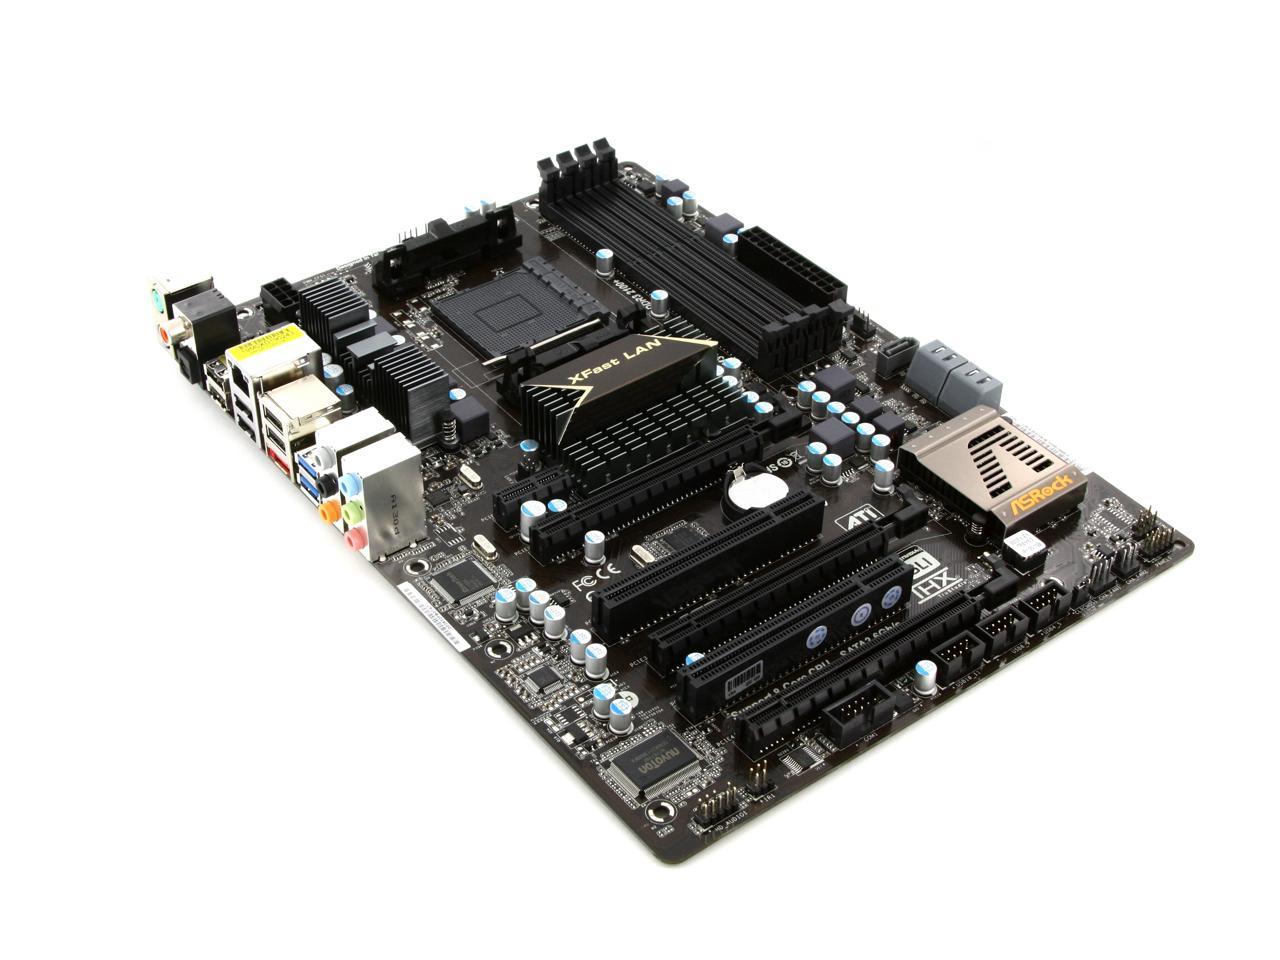 Used - Very Good: ASRock 990FX Extreme3 AM3+ ATX AMD Motherboard with